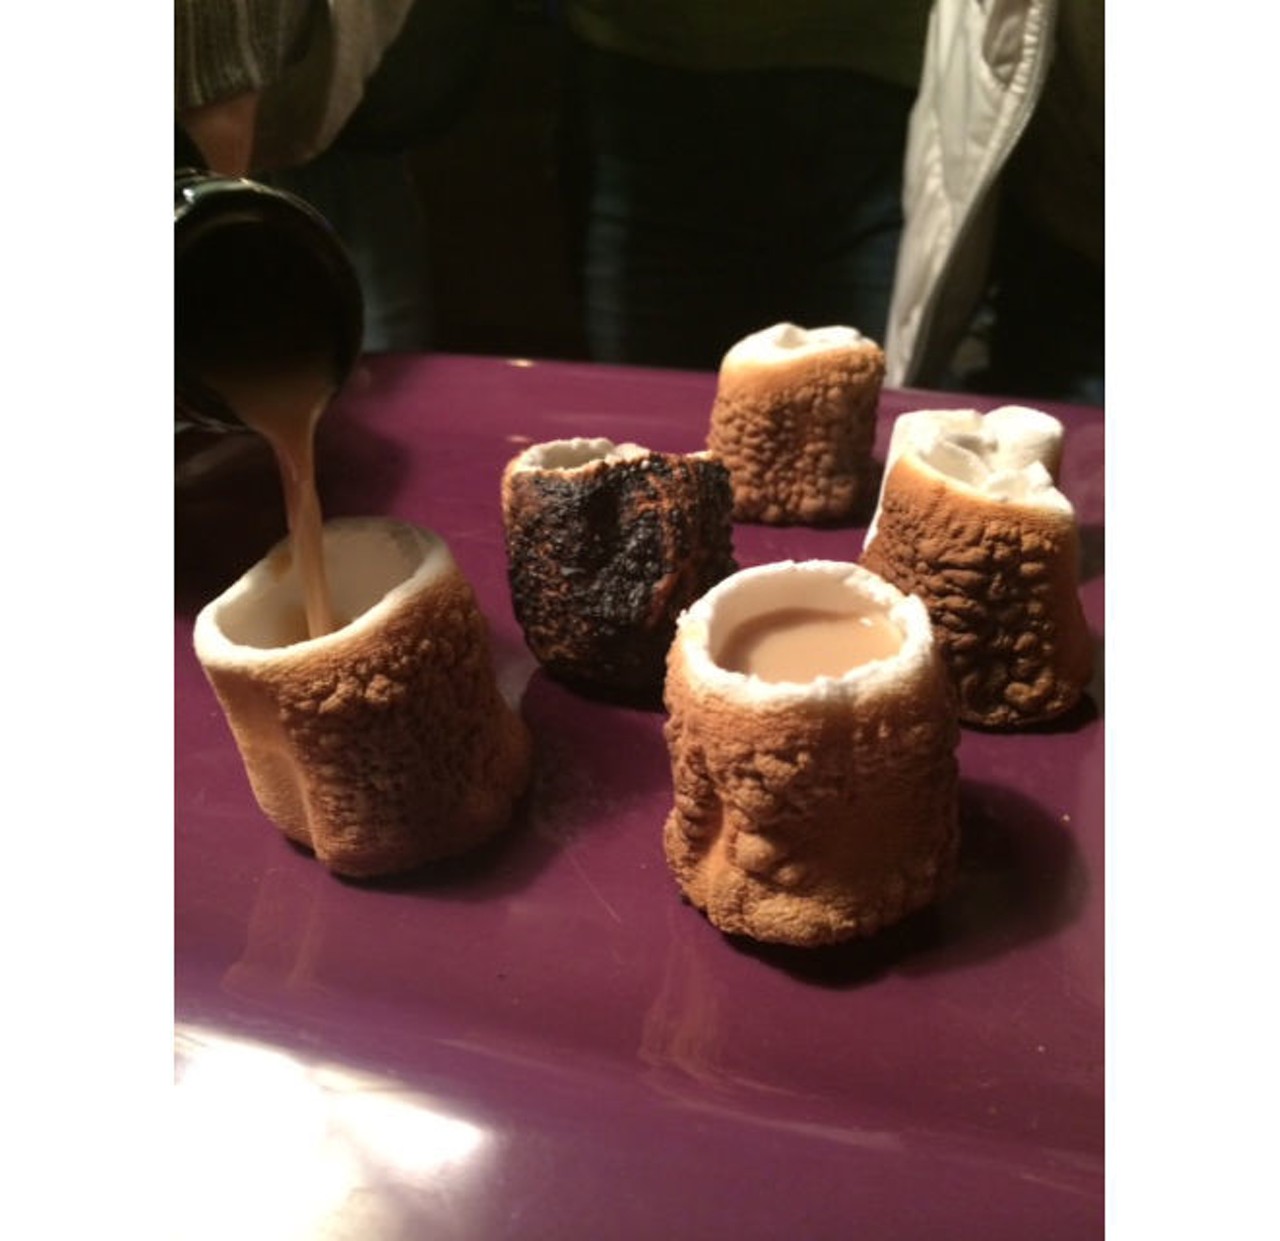 We did it! Homemade marshmallow Bailey's shotsRelated: Thank you, Internet: Marshmallow shot glasses